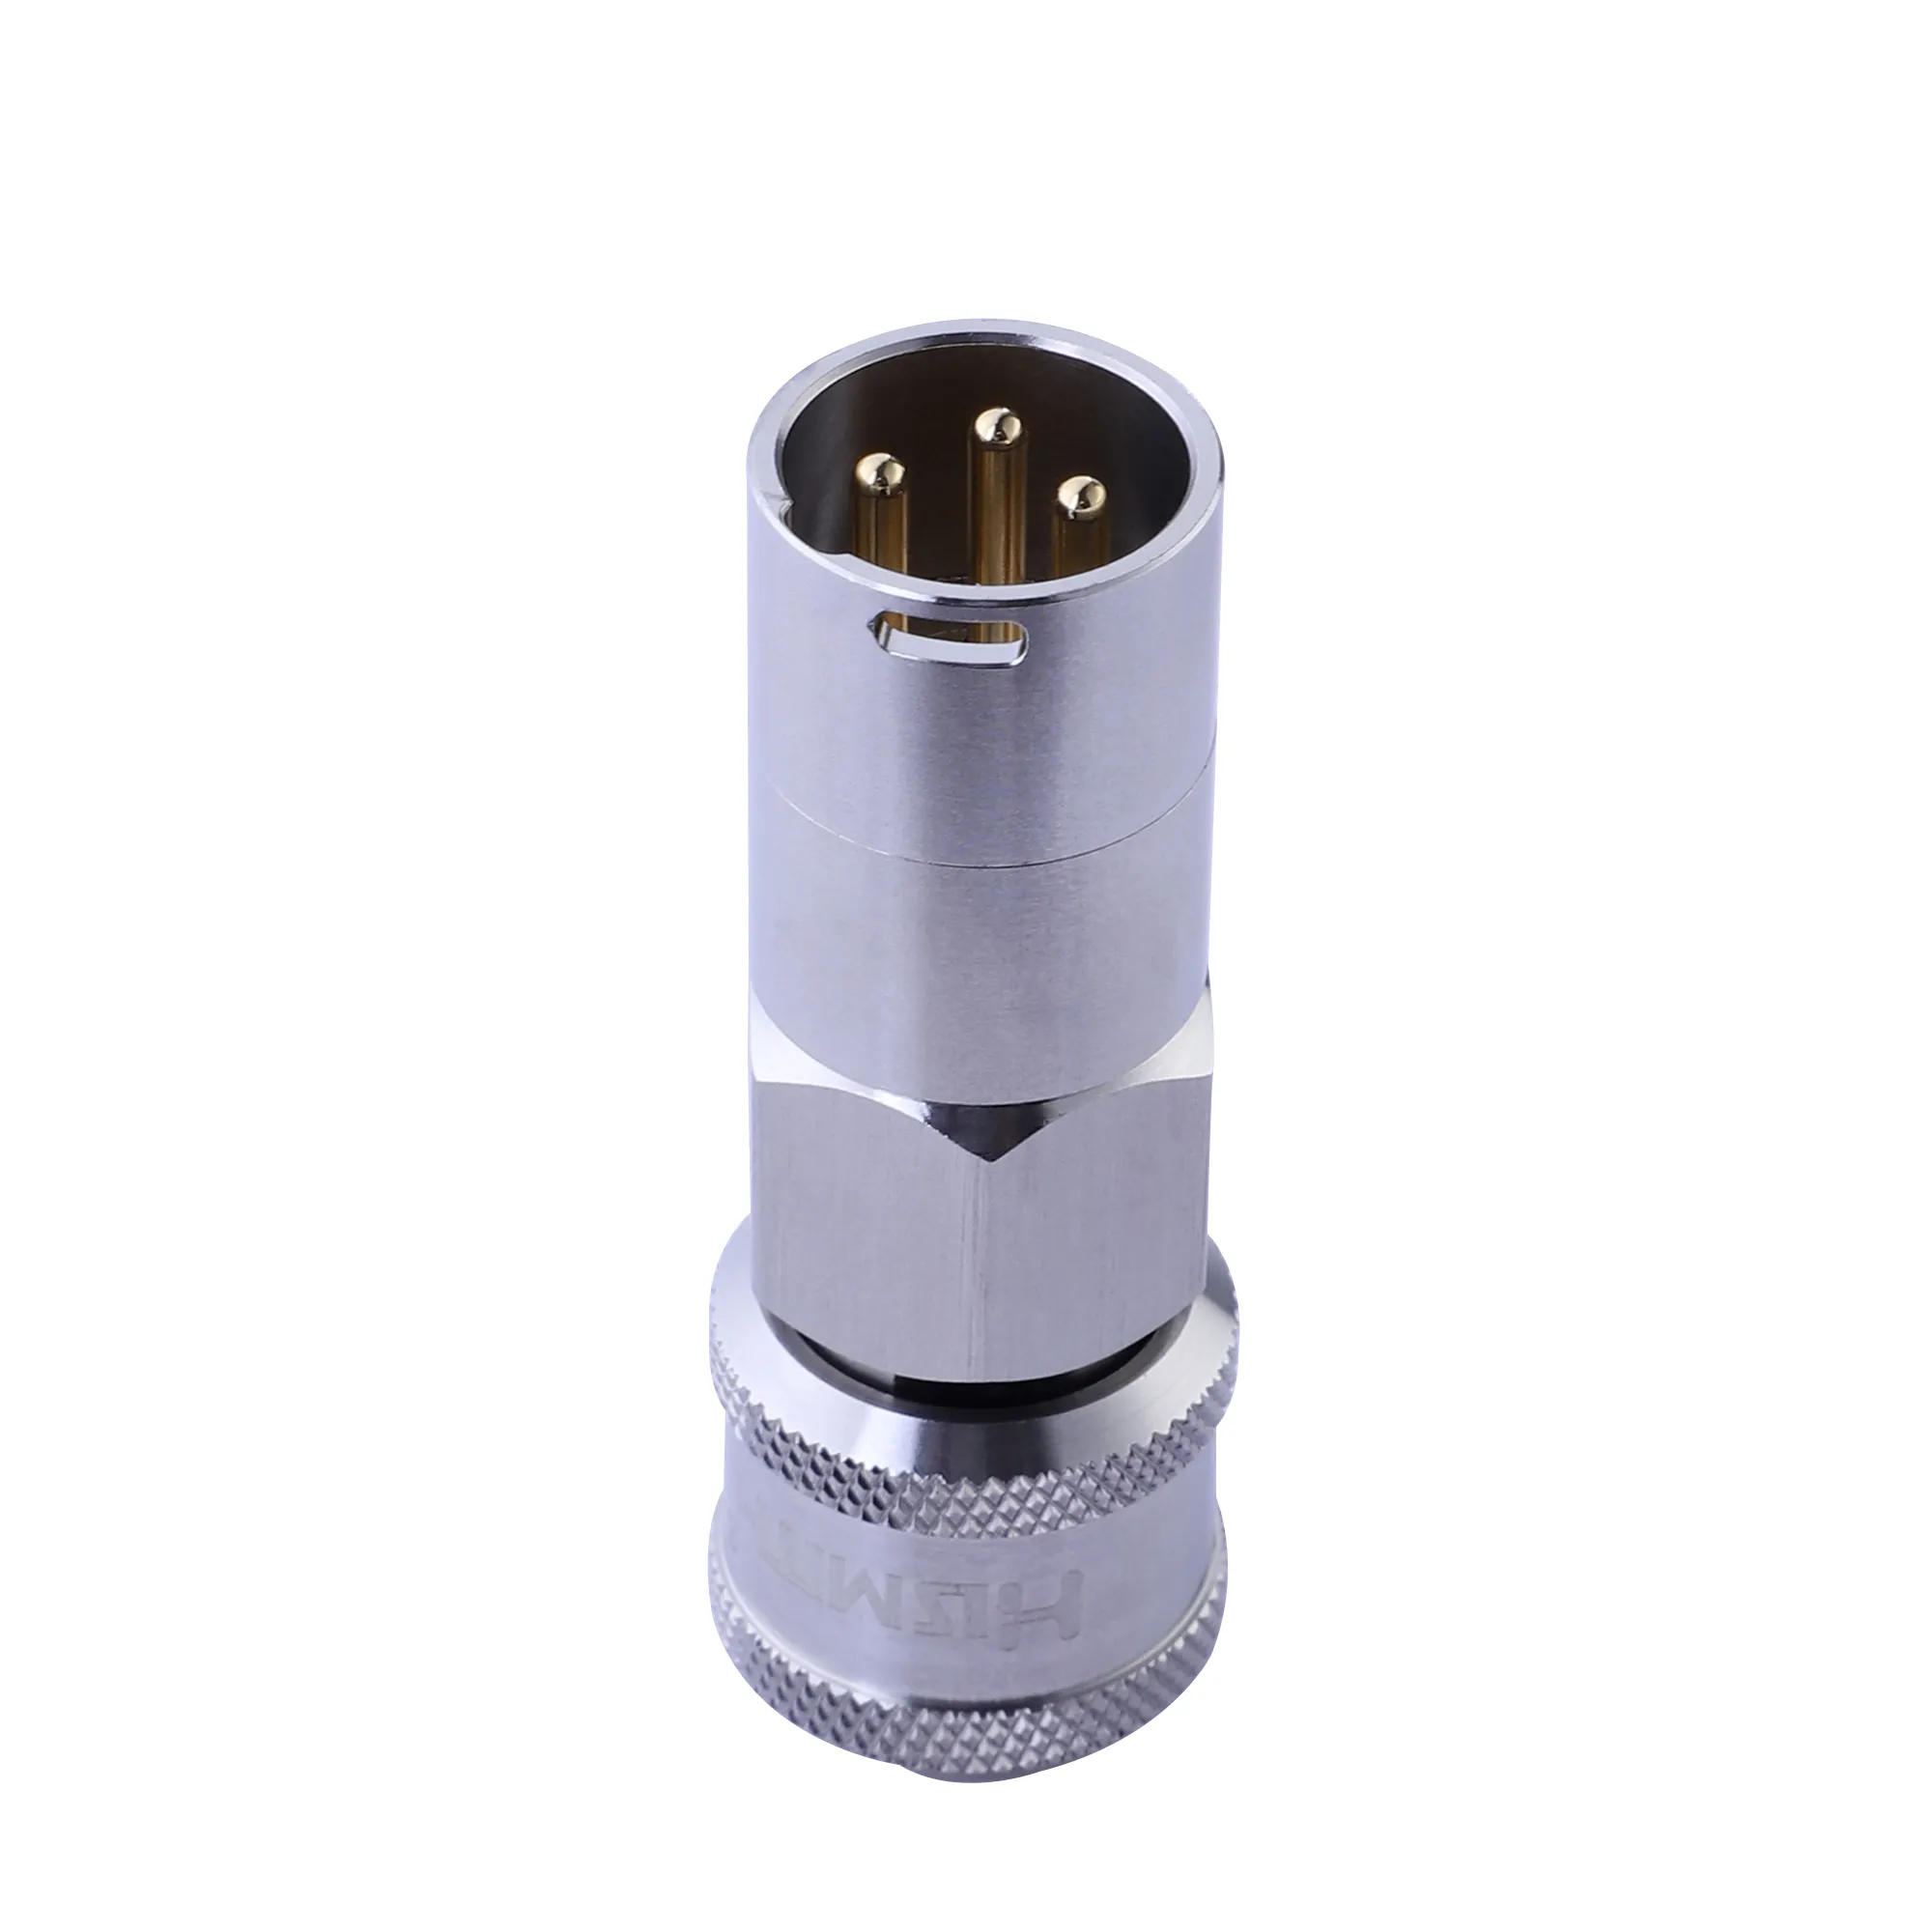 Hismith Adapter for 3XLR Connector sexy Machine attachments toys KlicLok System Premium machine dildo accessories adapter